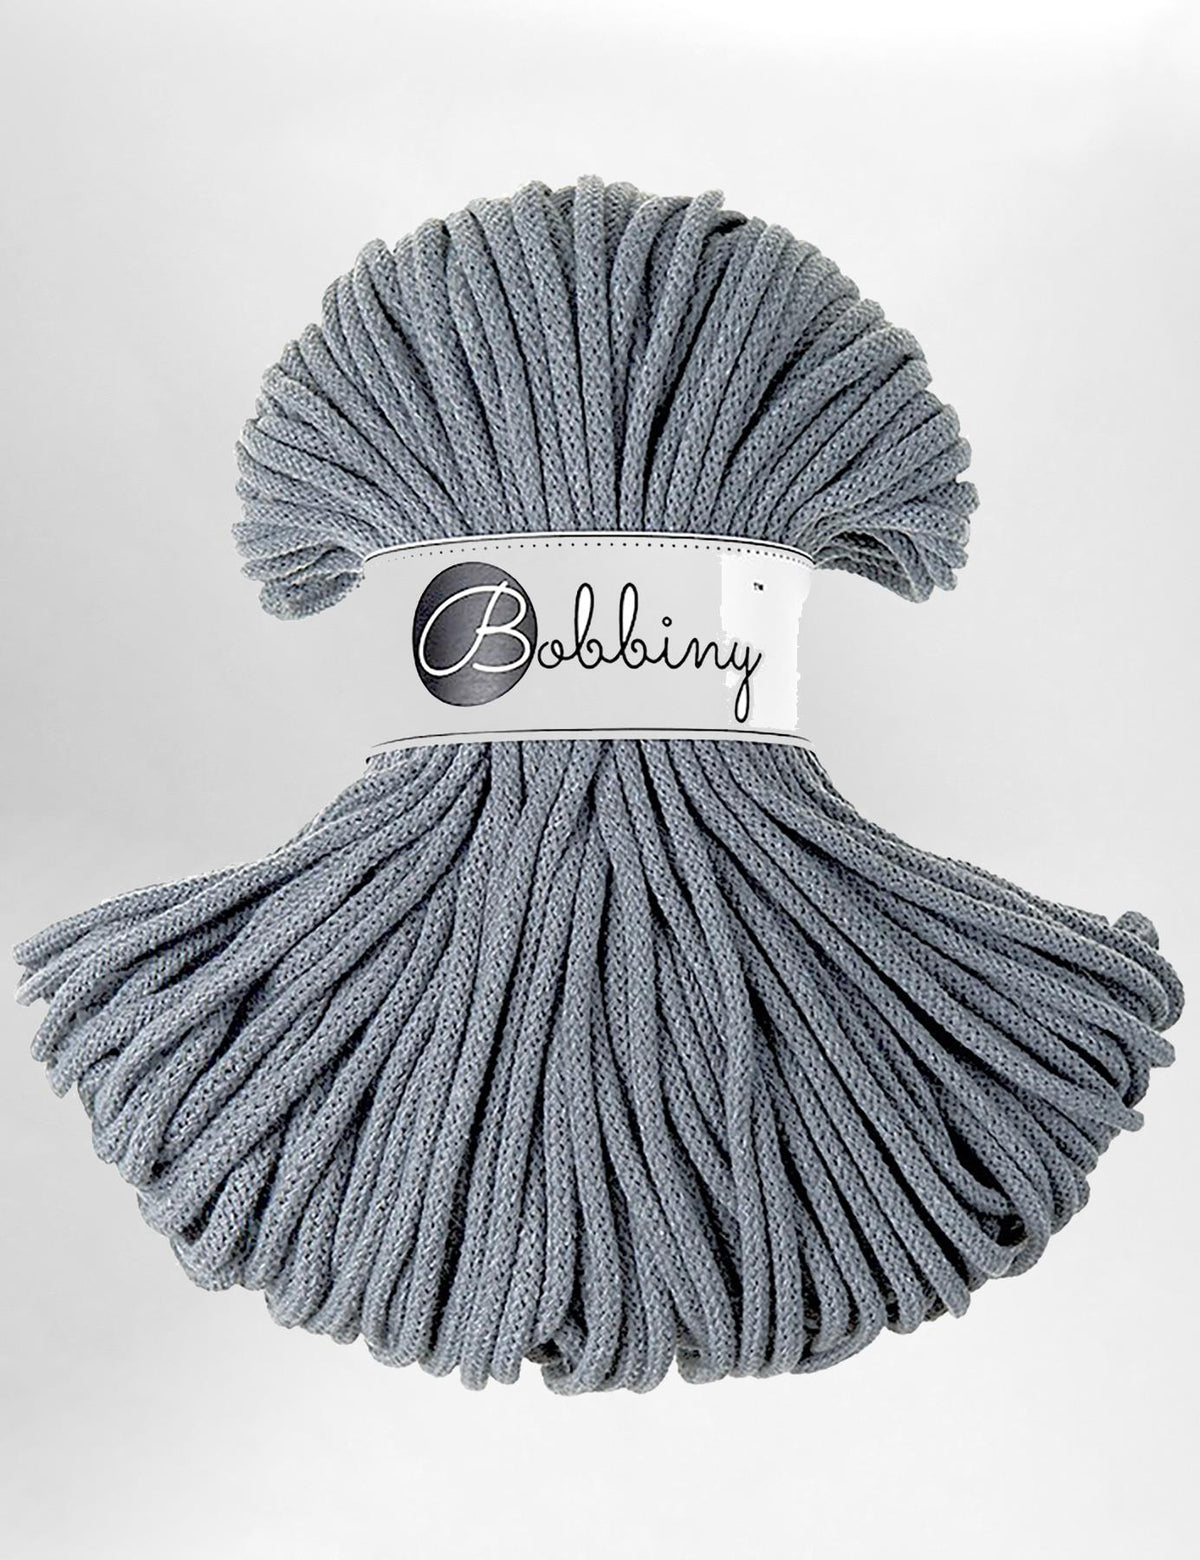 5mm Steel grey recycled cotton macrame cord by Bobbiny (100m)